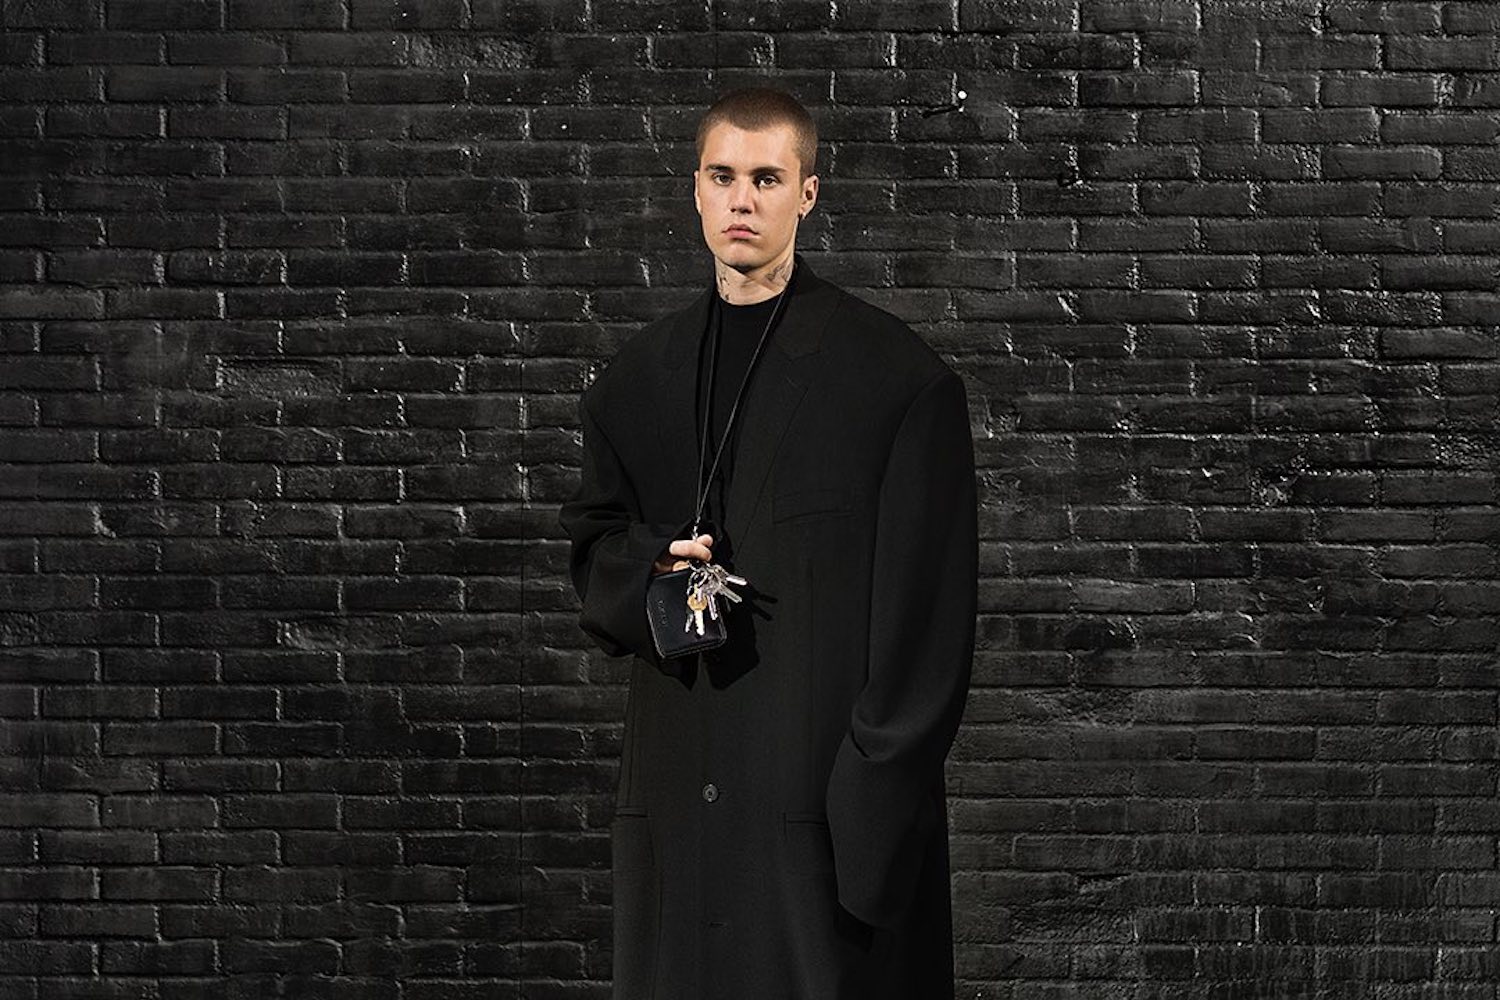 Justin Bieber Fronts New Balenciaga Campaign In Bizarre ‘Priest’ Outfit